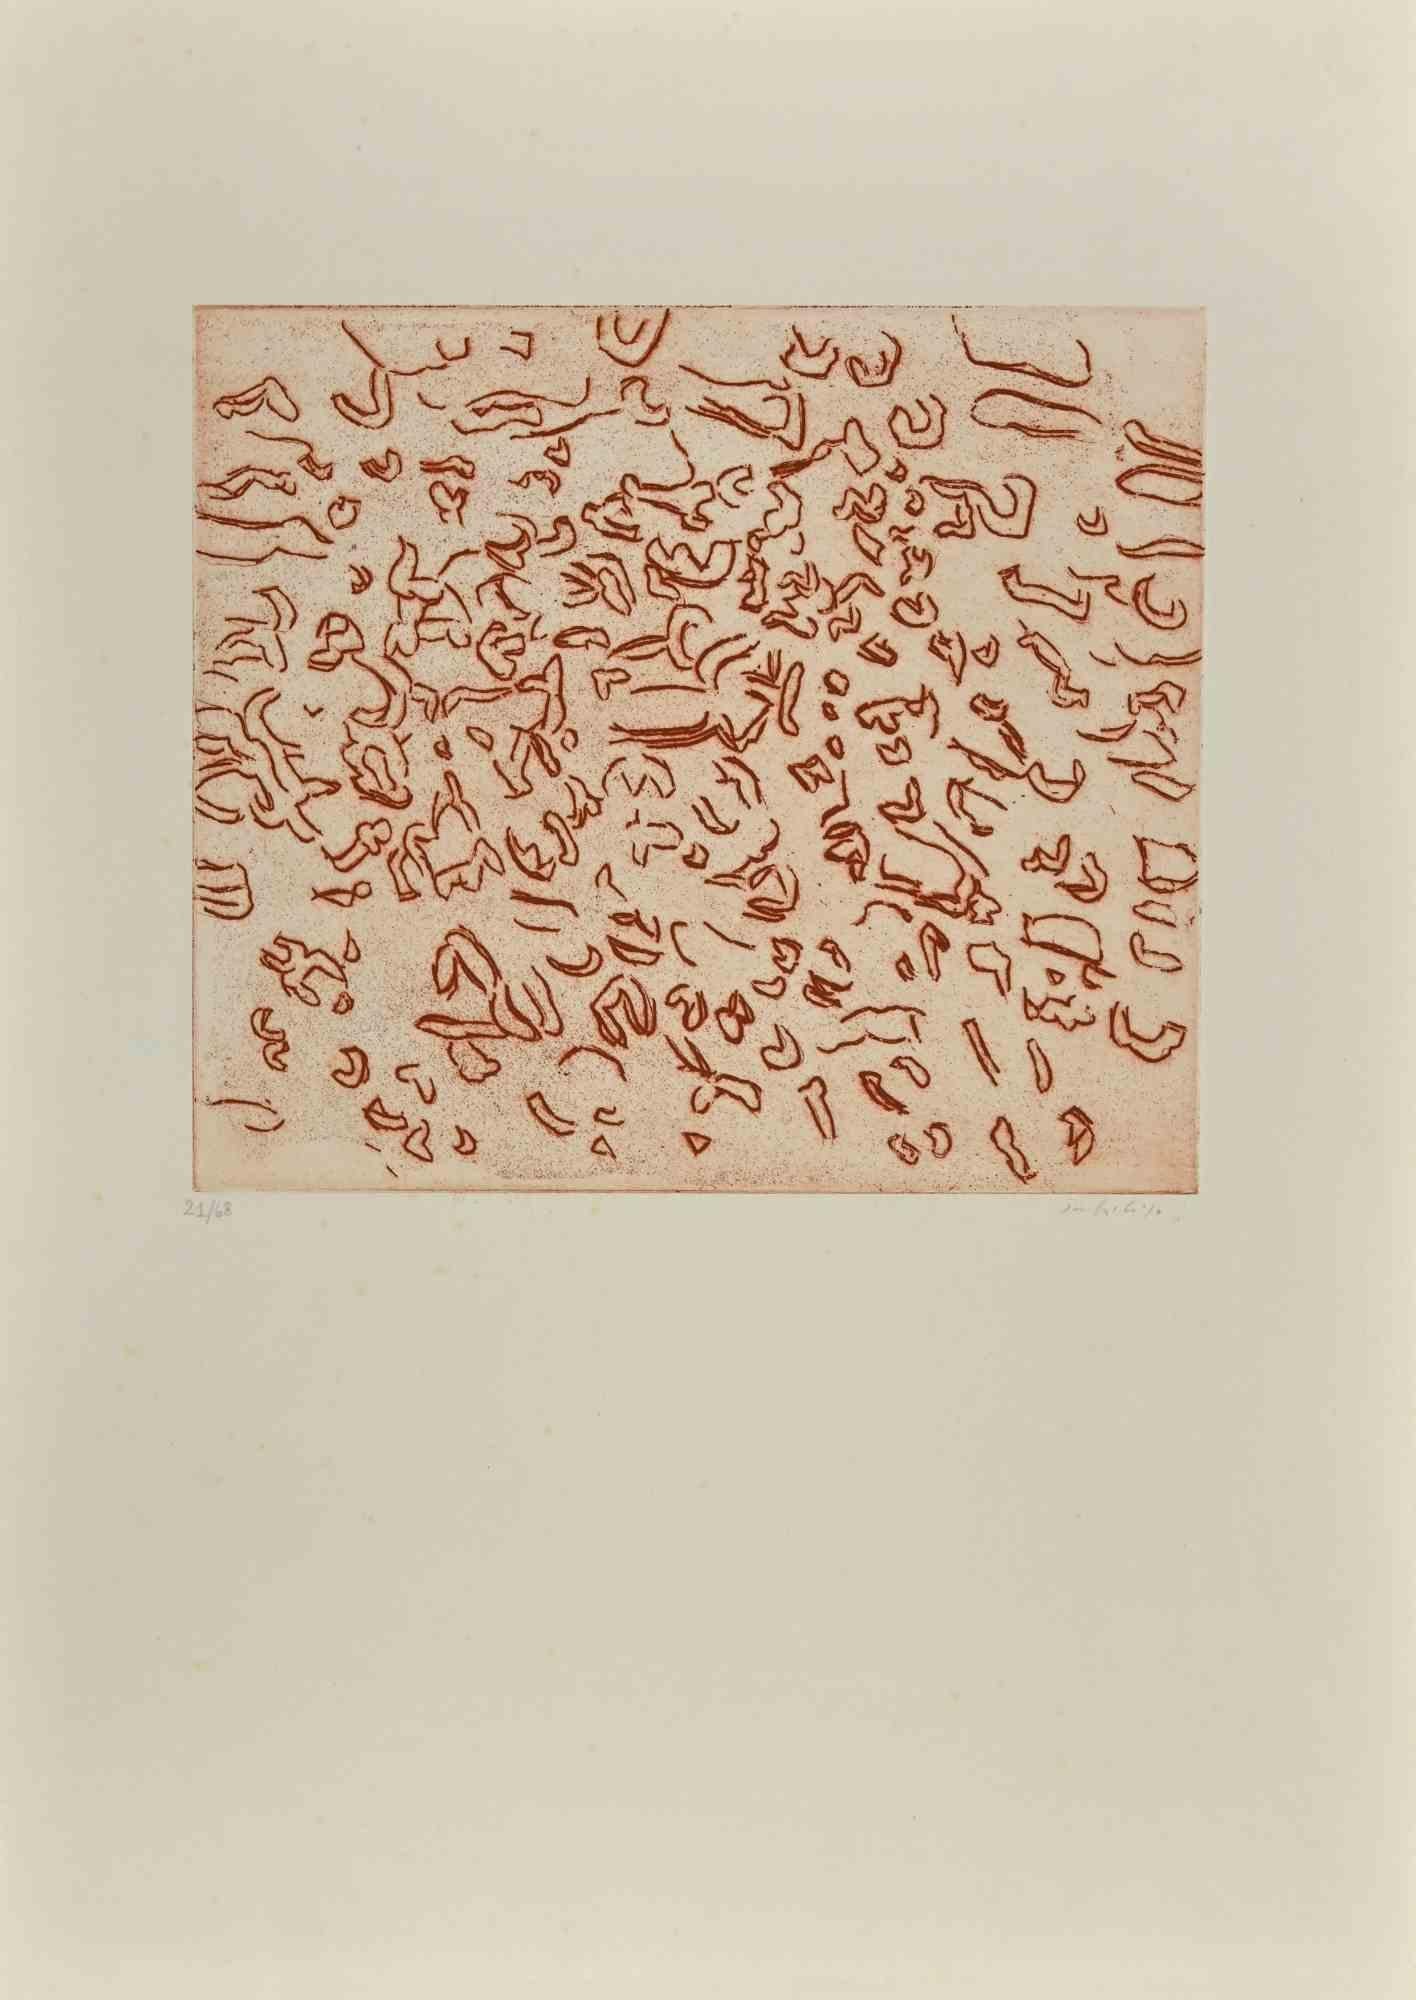 Untitled is an etching realized by the Italian artist Antonio Sanfilippo.

Hand-signed in pencil on the lower right.

Numbered on the lower left. Edition 21/68 prints.

Good conditions except some foxing.

This artwork is depicted in a well-balanced